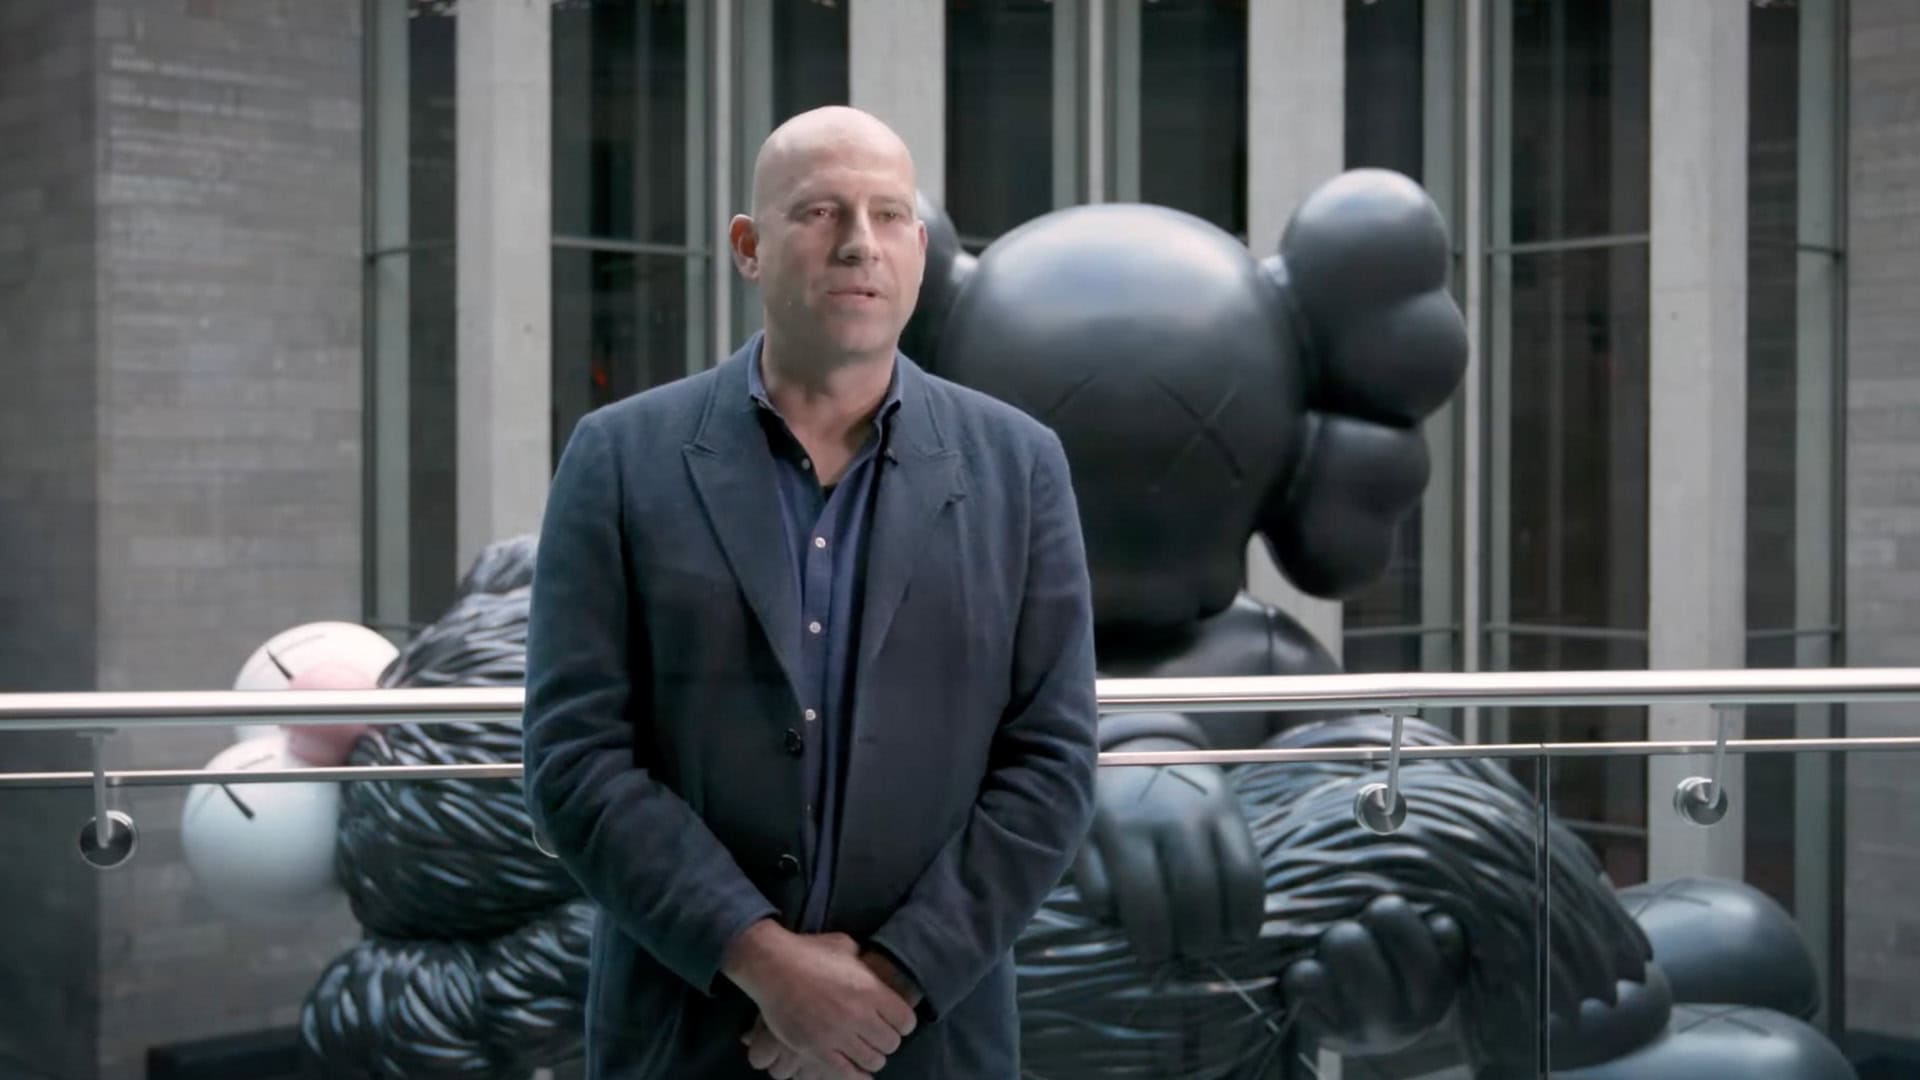 KAWS GONE at NGV with Head of Conservation, Michael Varcoe-Cocks